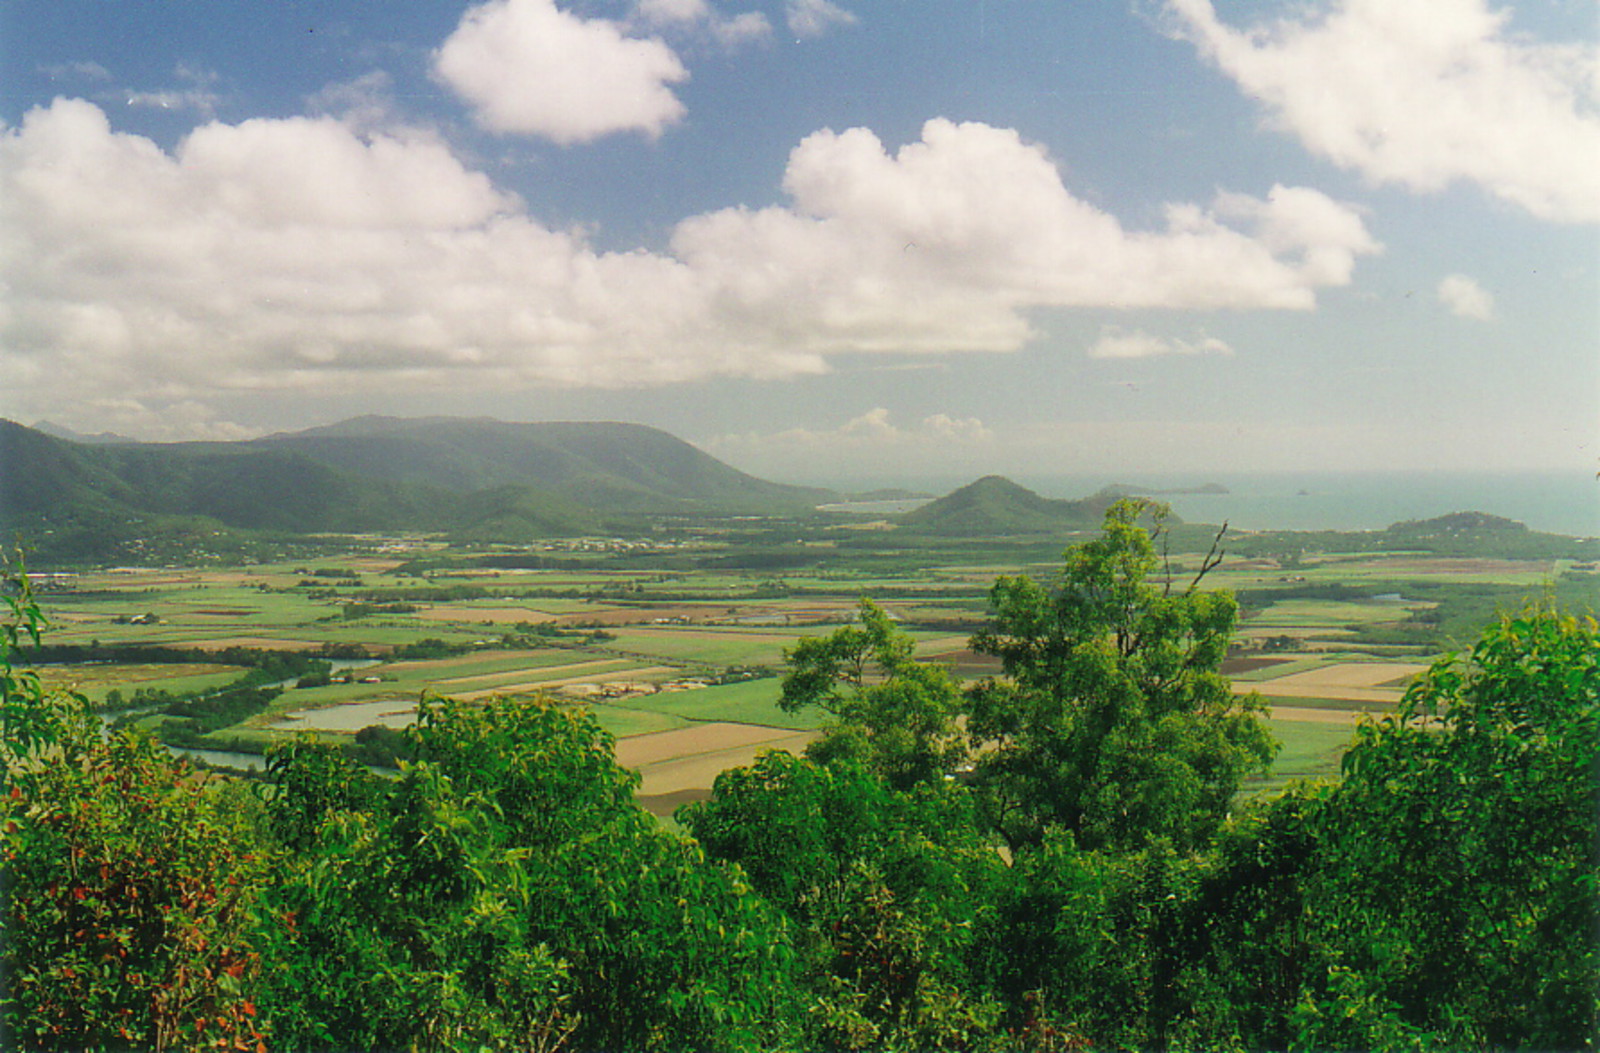 The view north from Mt Lumley Hill in Mt Whitfield Environmental Park